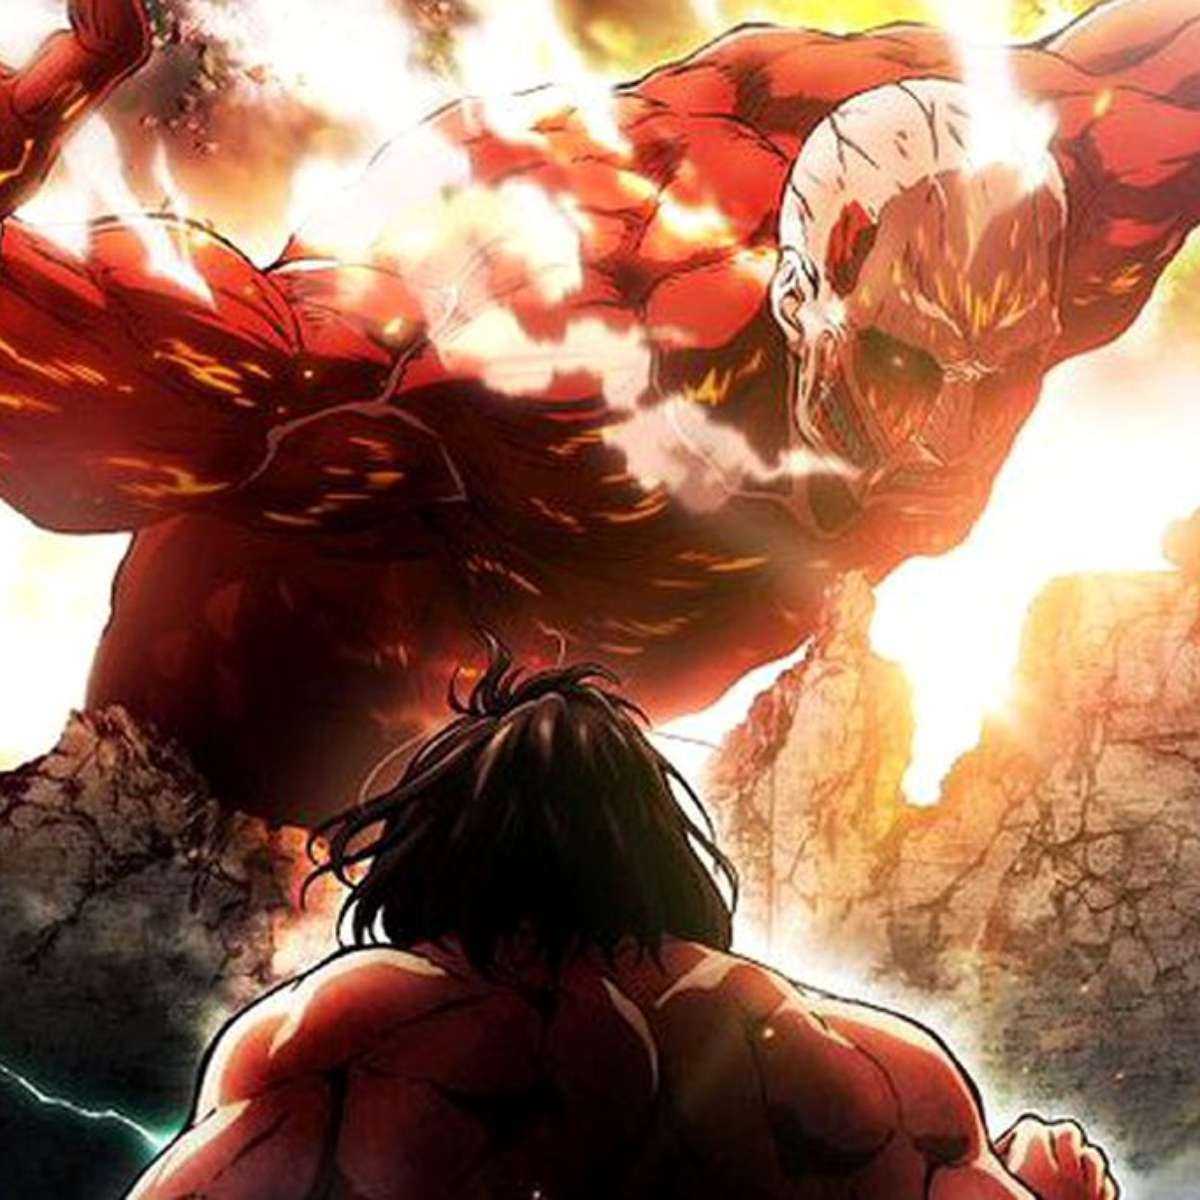 Onde Assistir Attack on Titan Final Season The Final Chapters